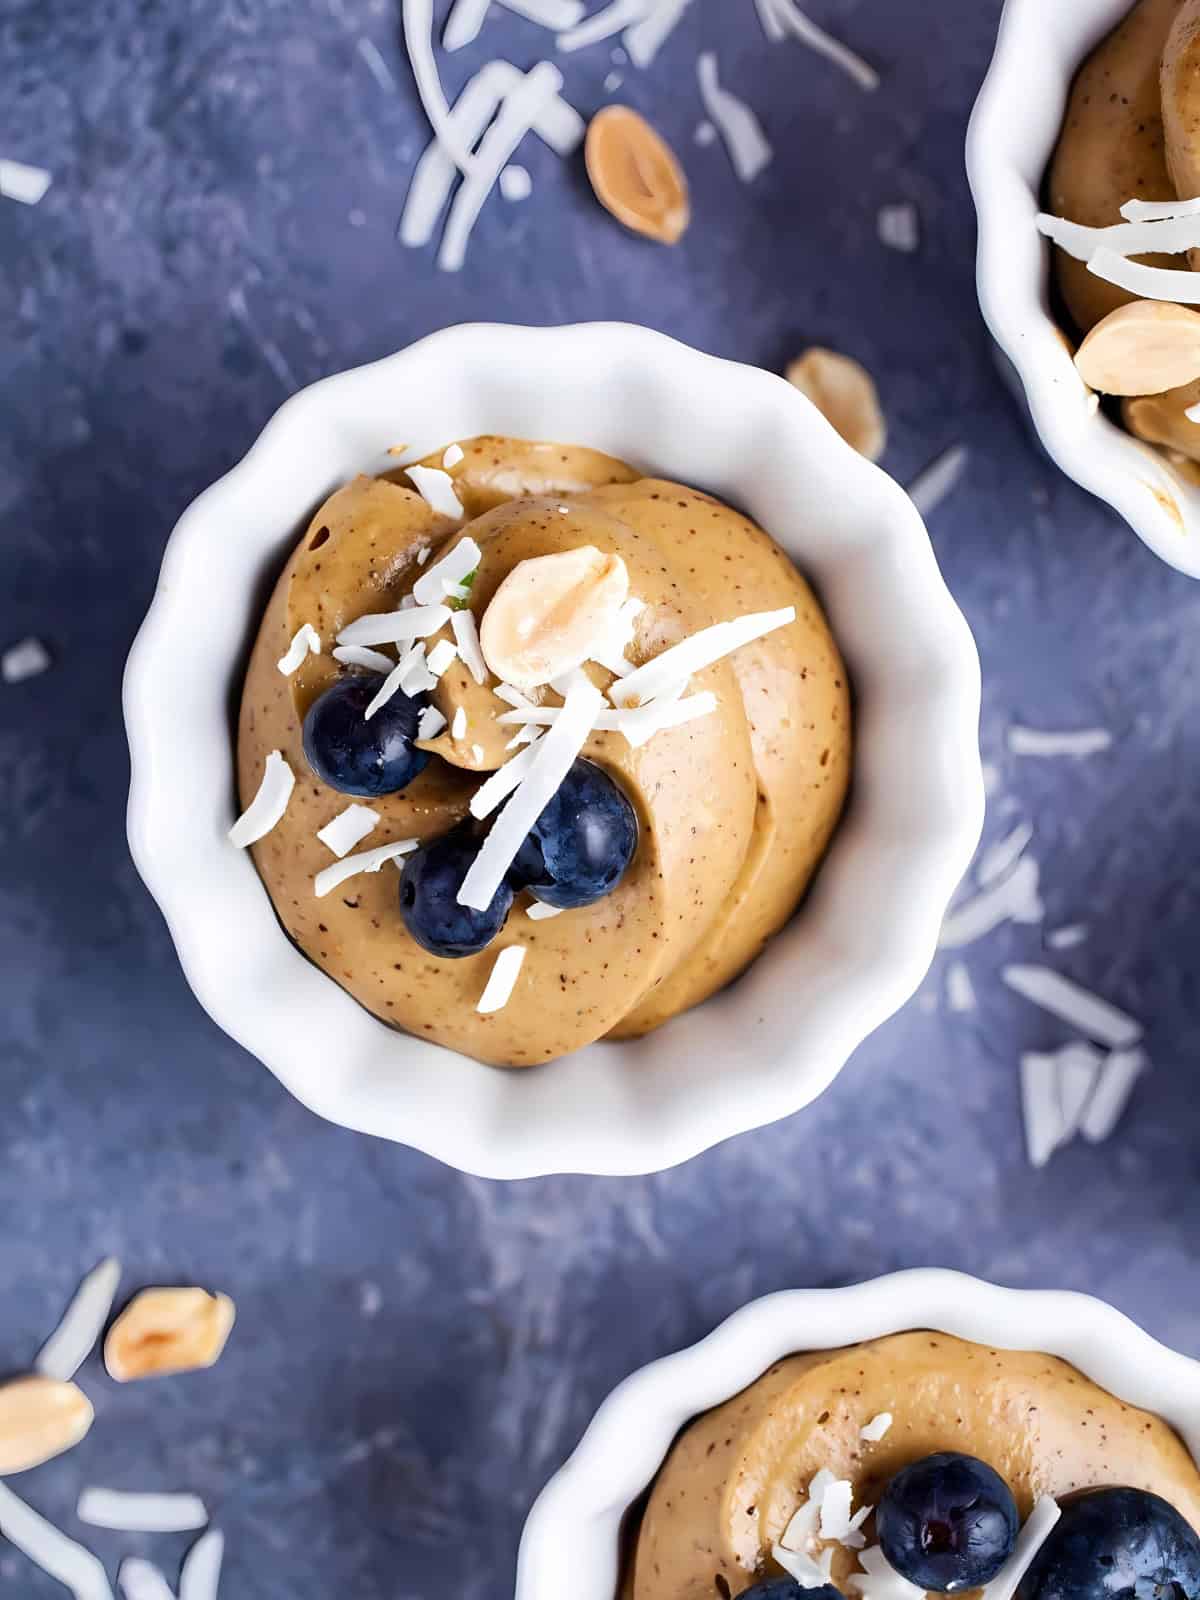 Chocolate peanut butter mousse placed in a small bowl topped with nuts and blueberries.